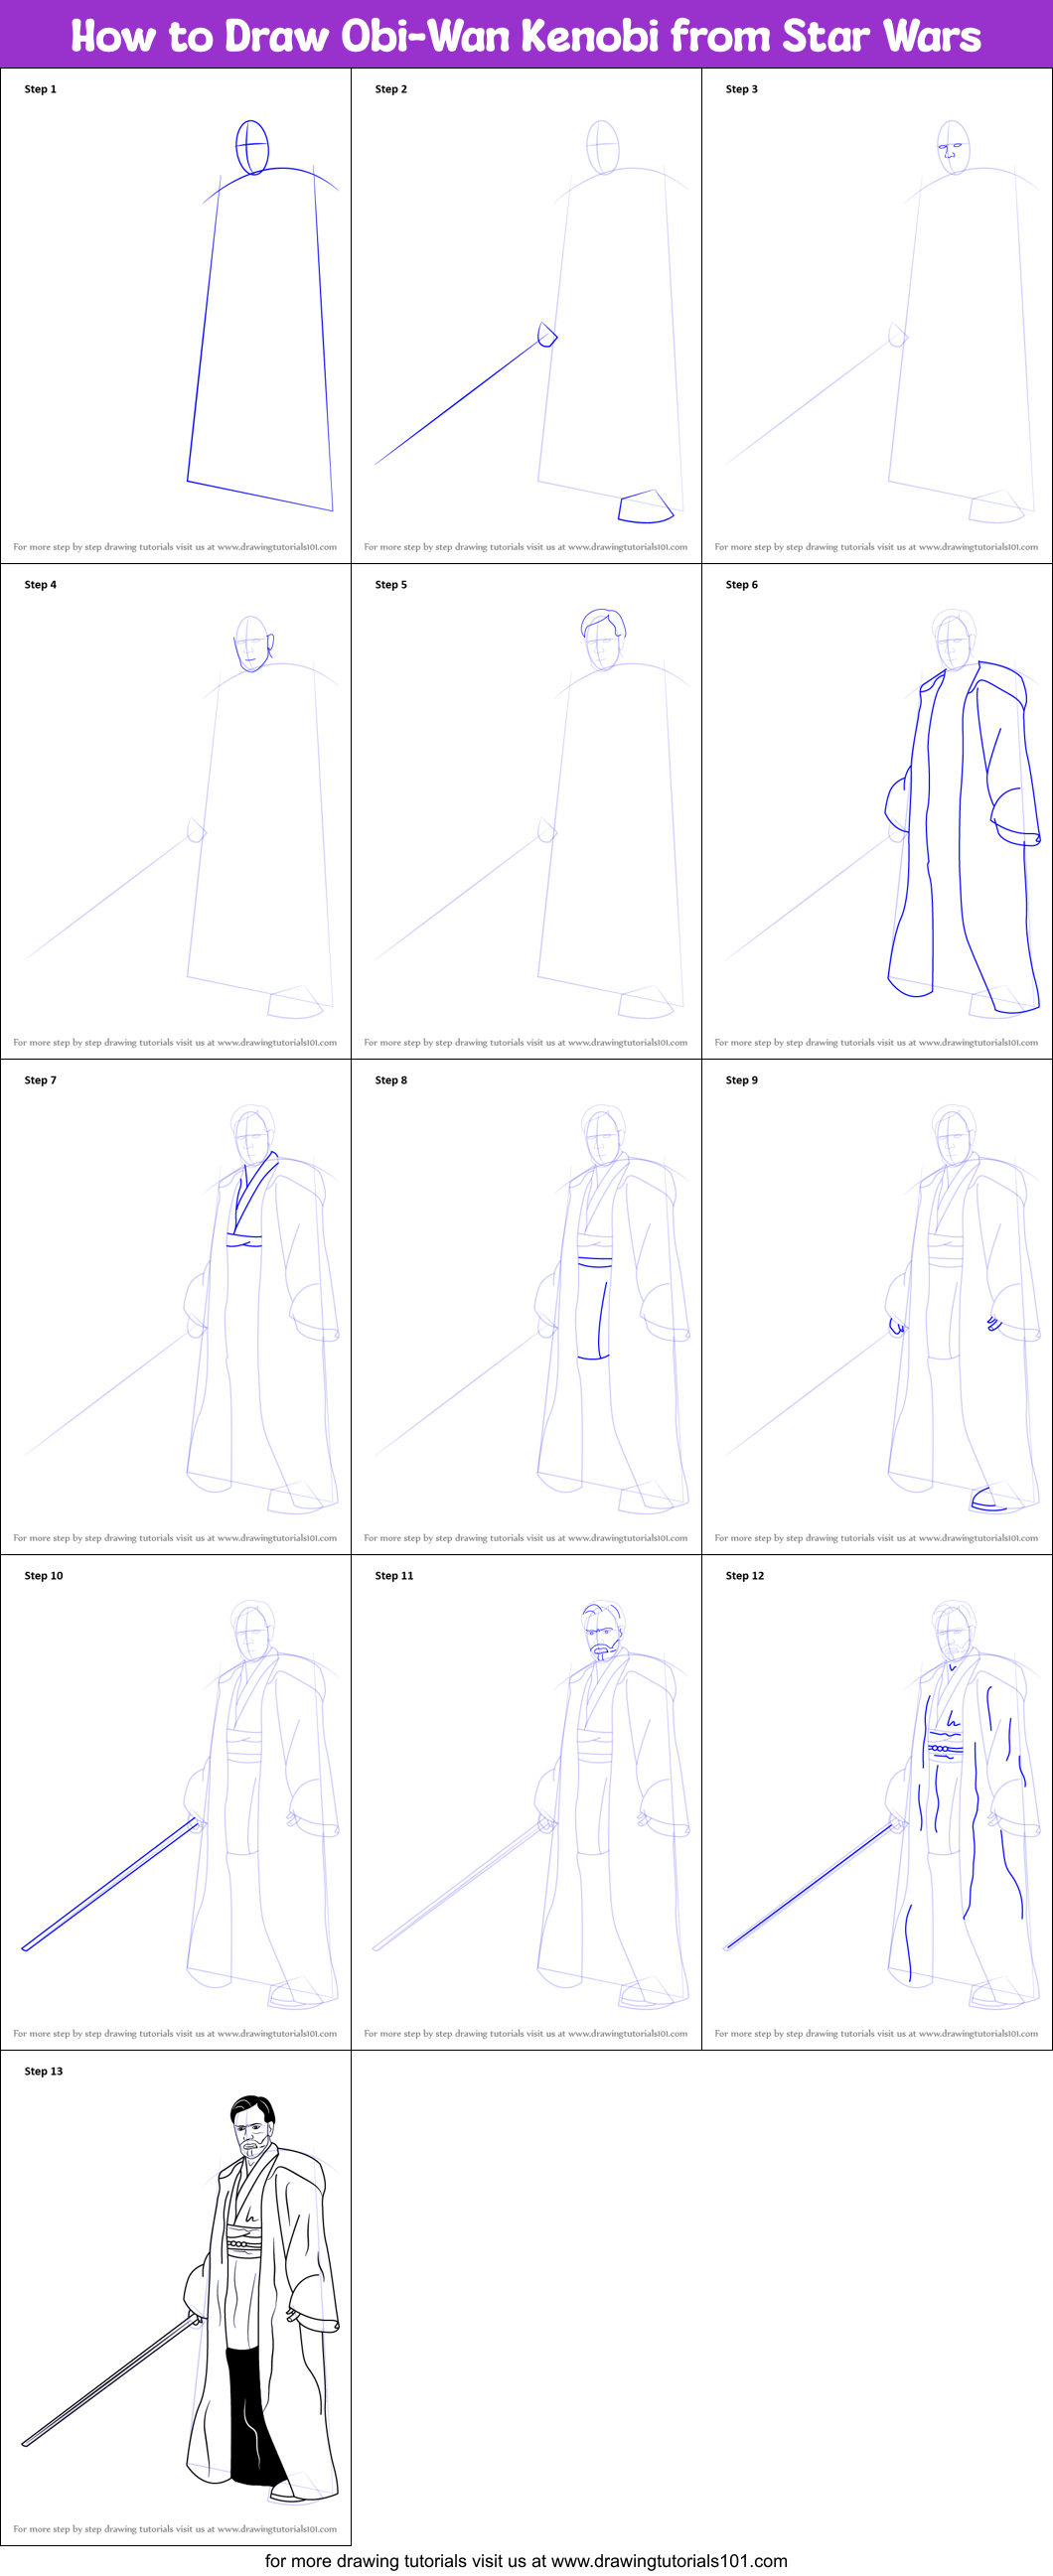 How to Draw ObiWan Kenobi from Star Wars printable step by step